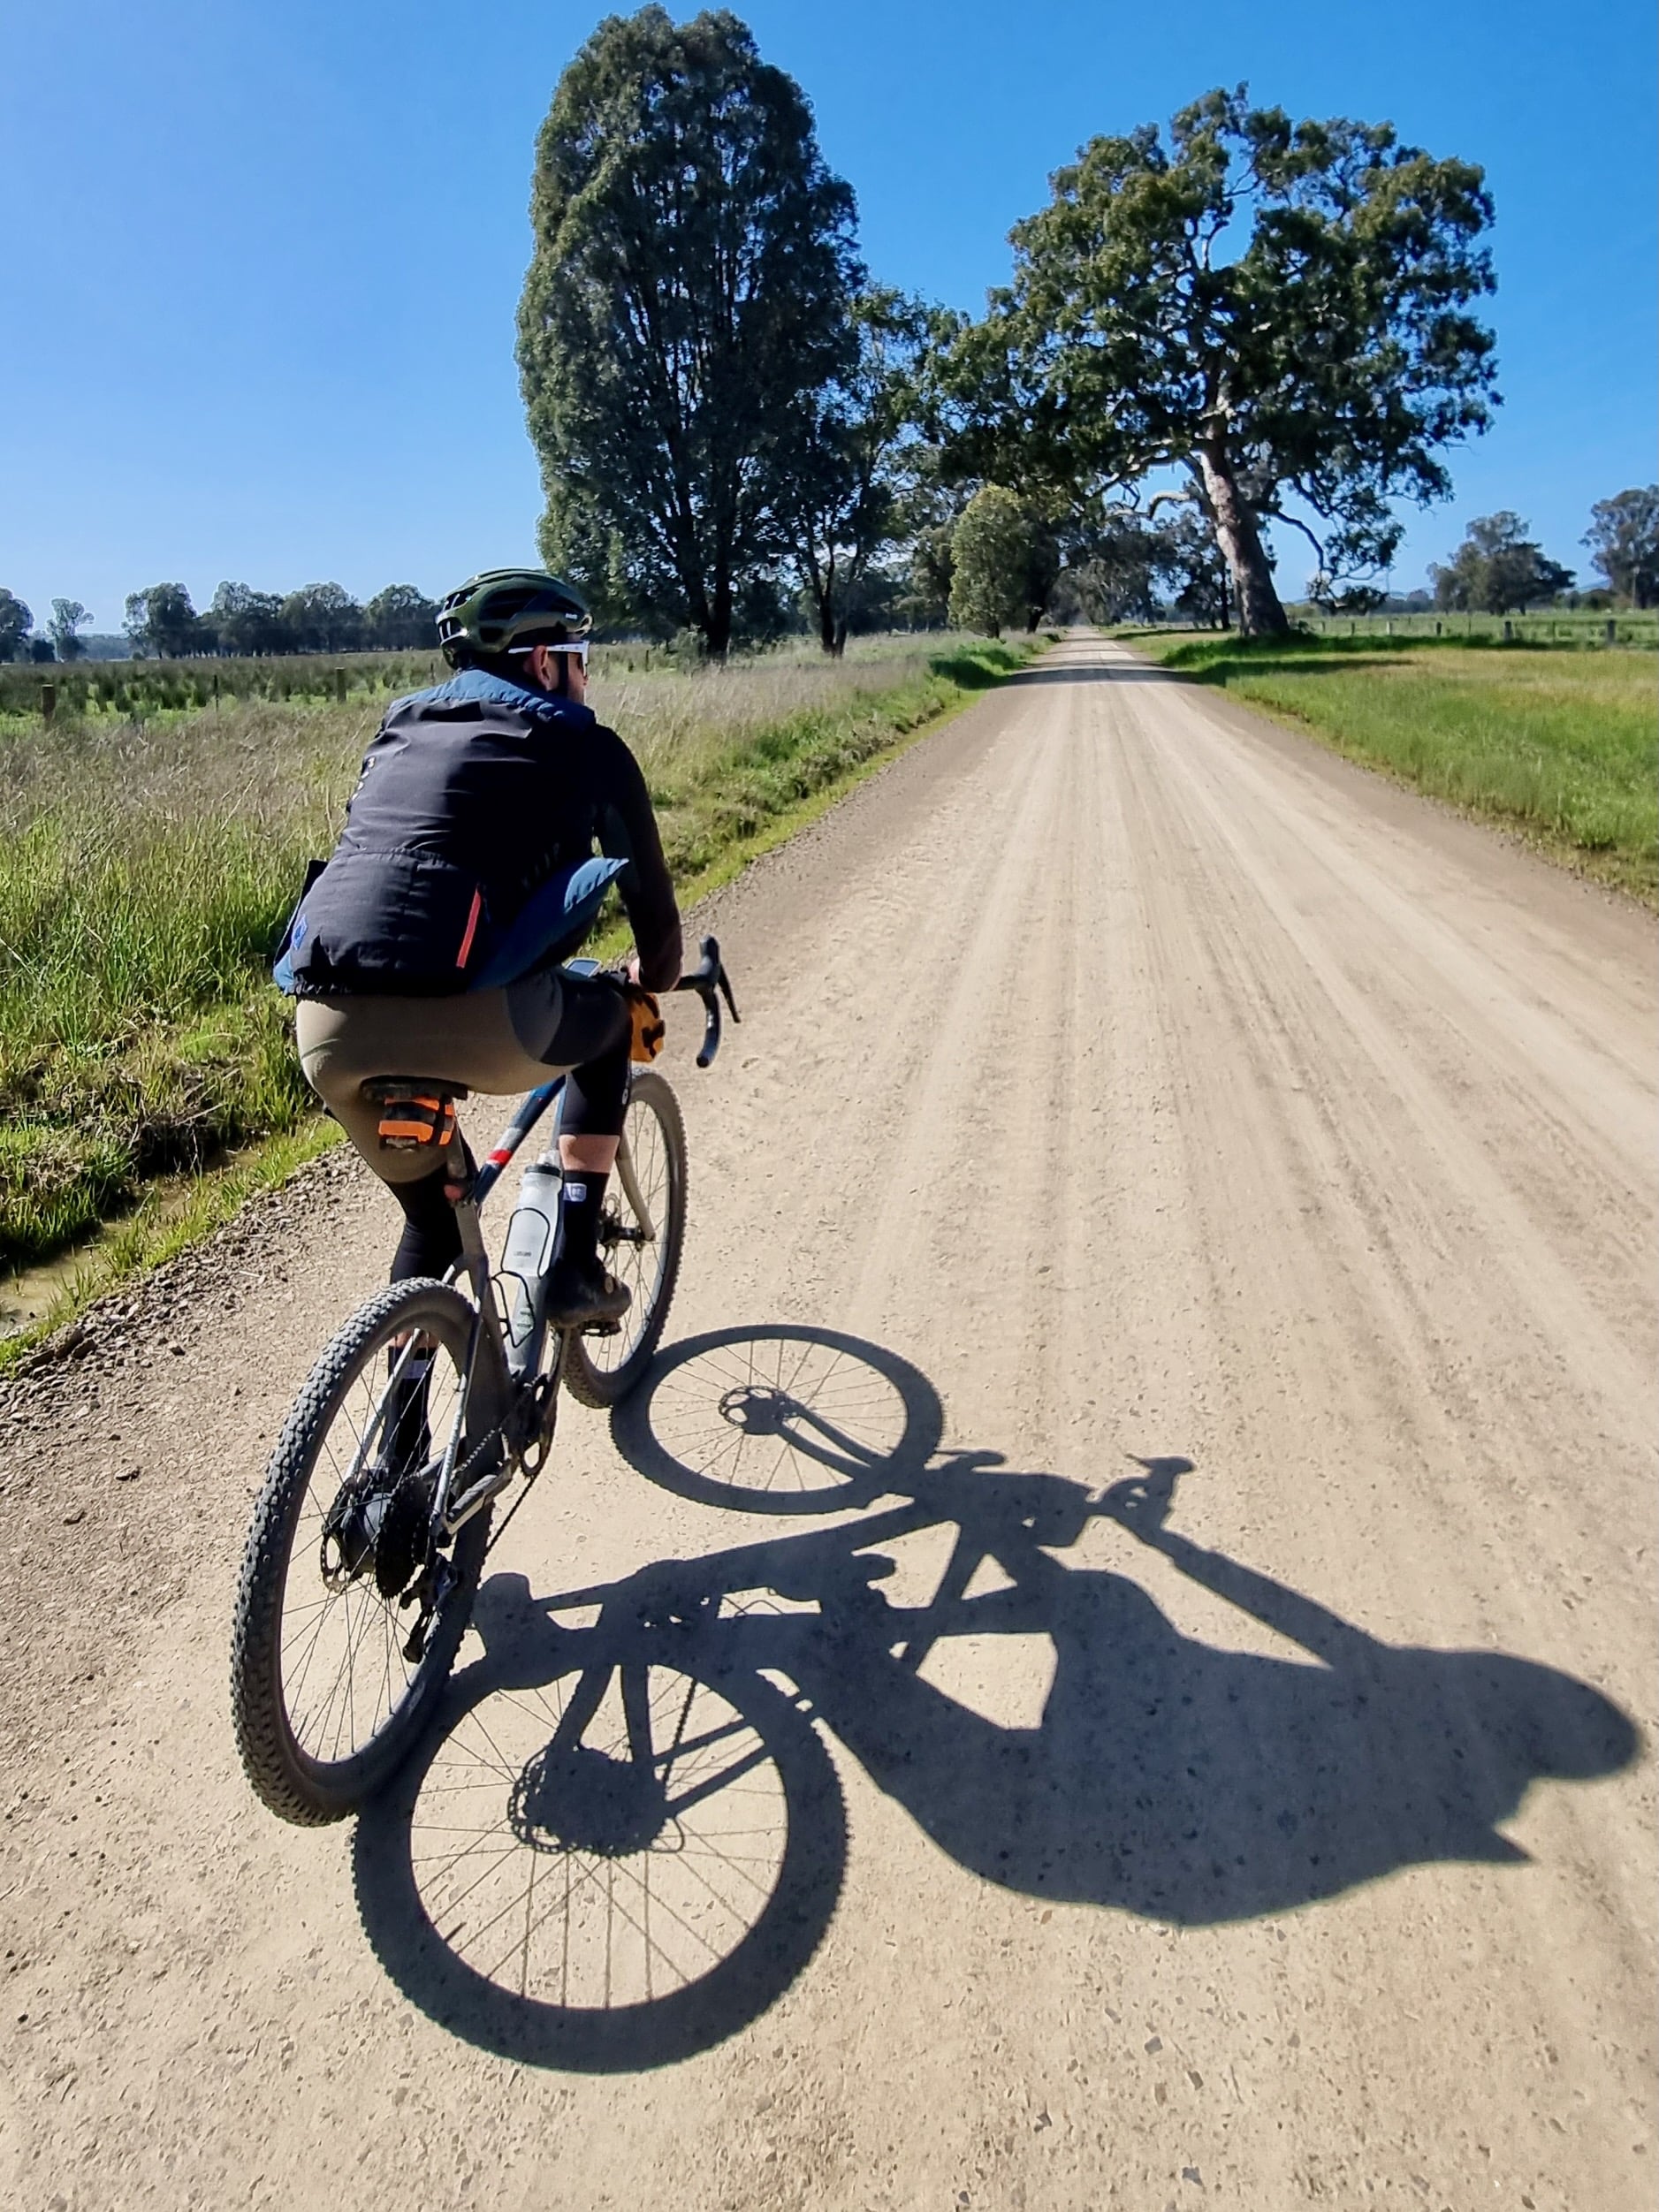 Cyclist riding on a tree-lined smooth gravel road on a sunny day